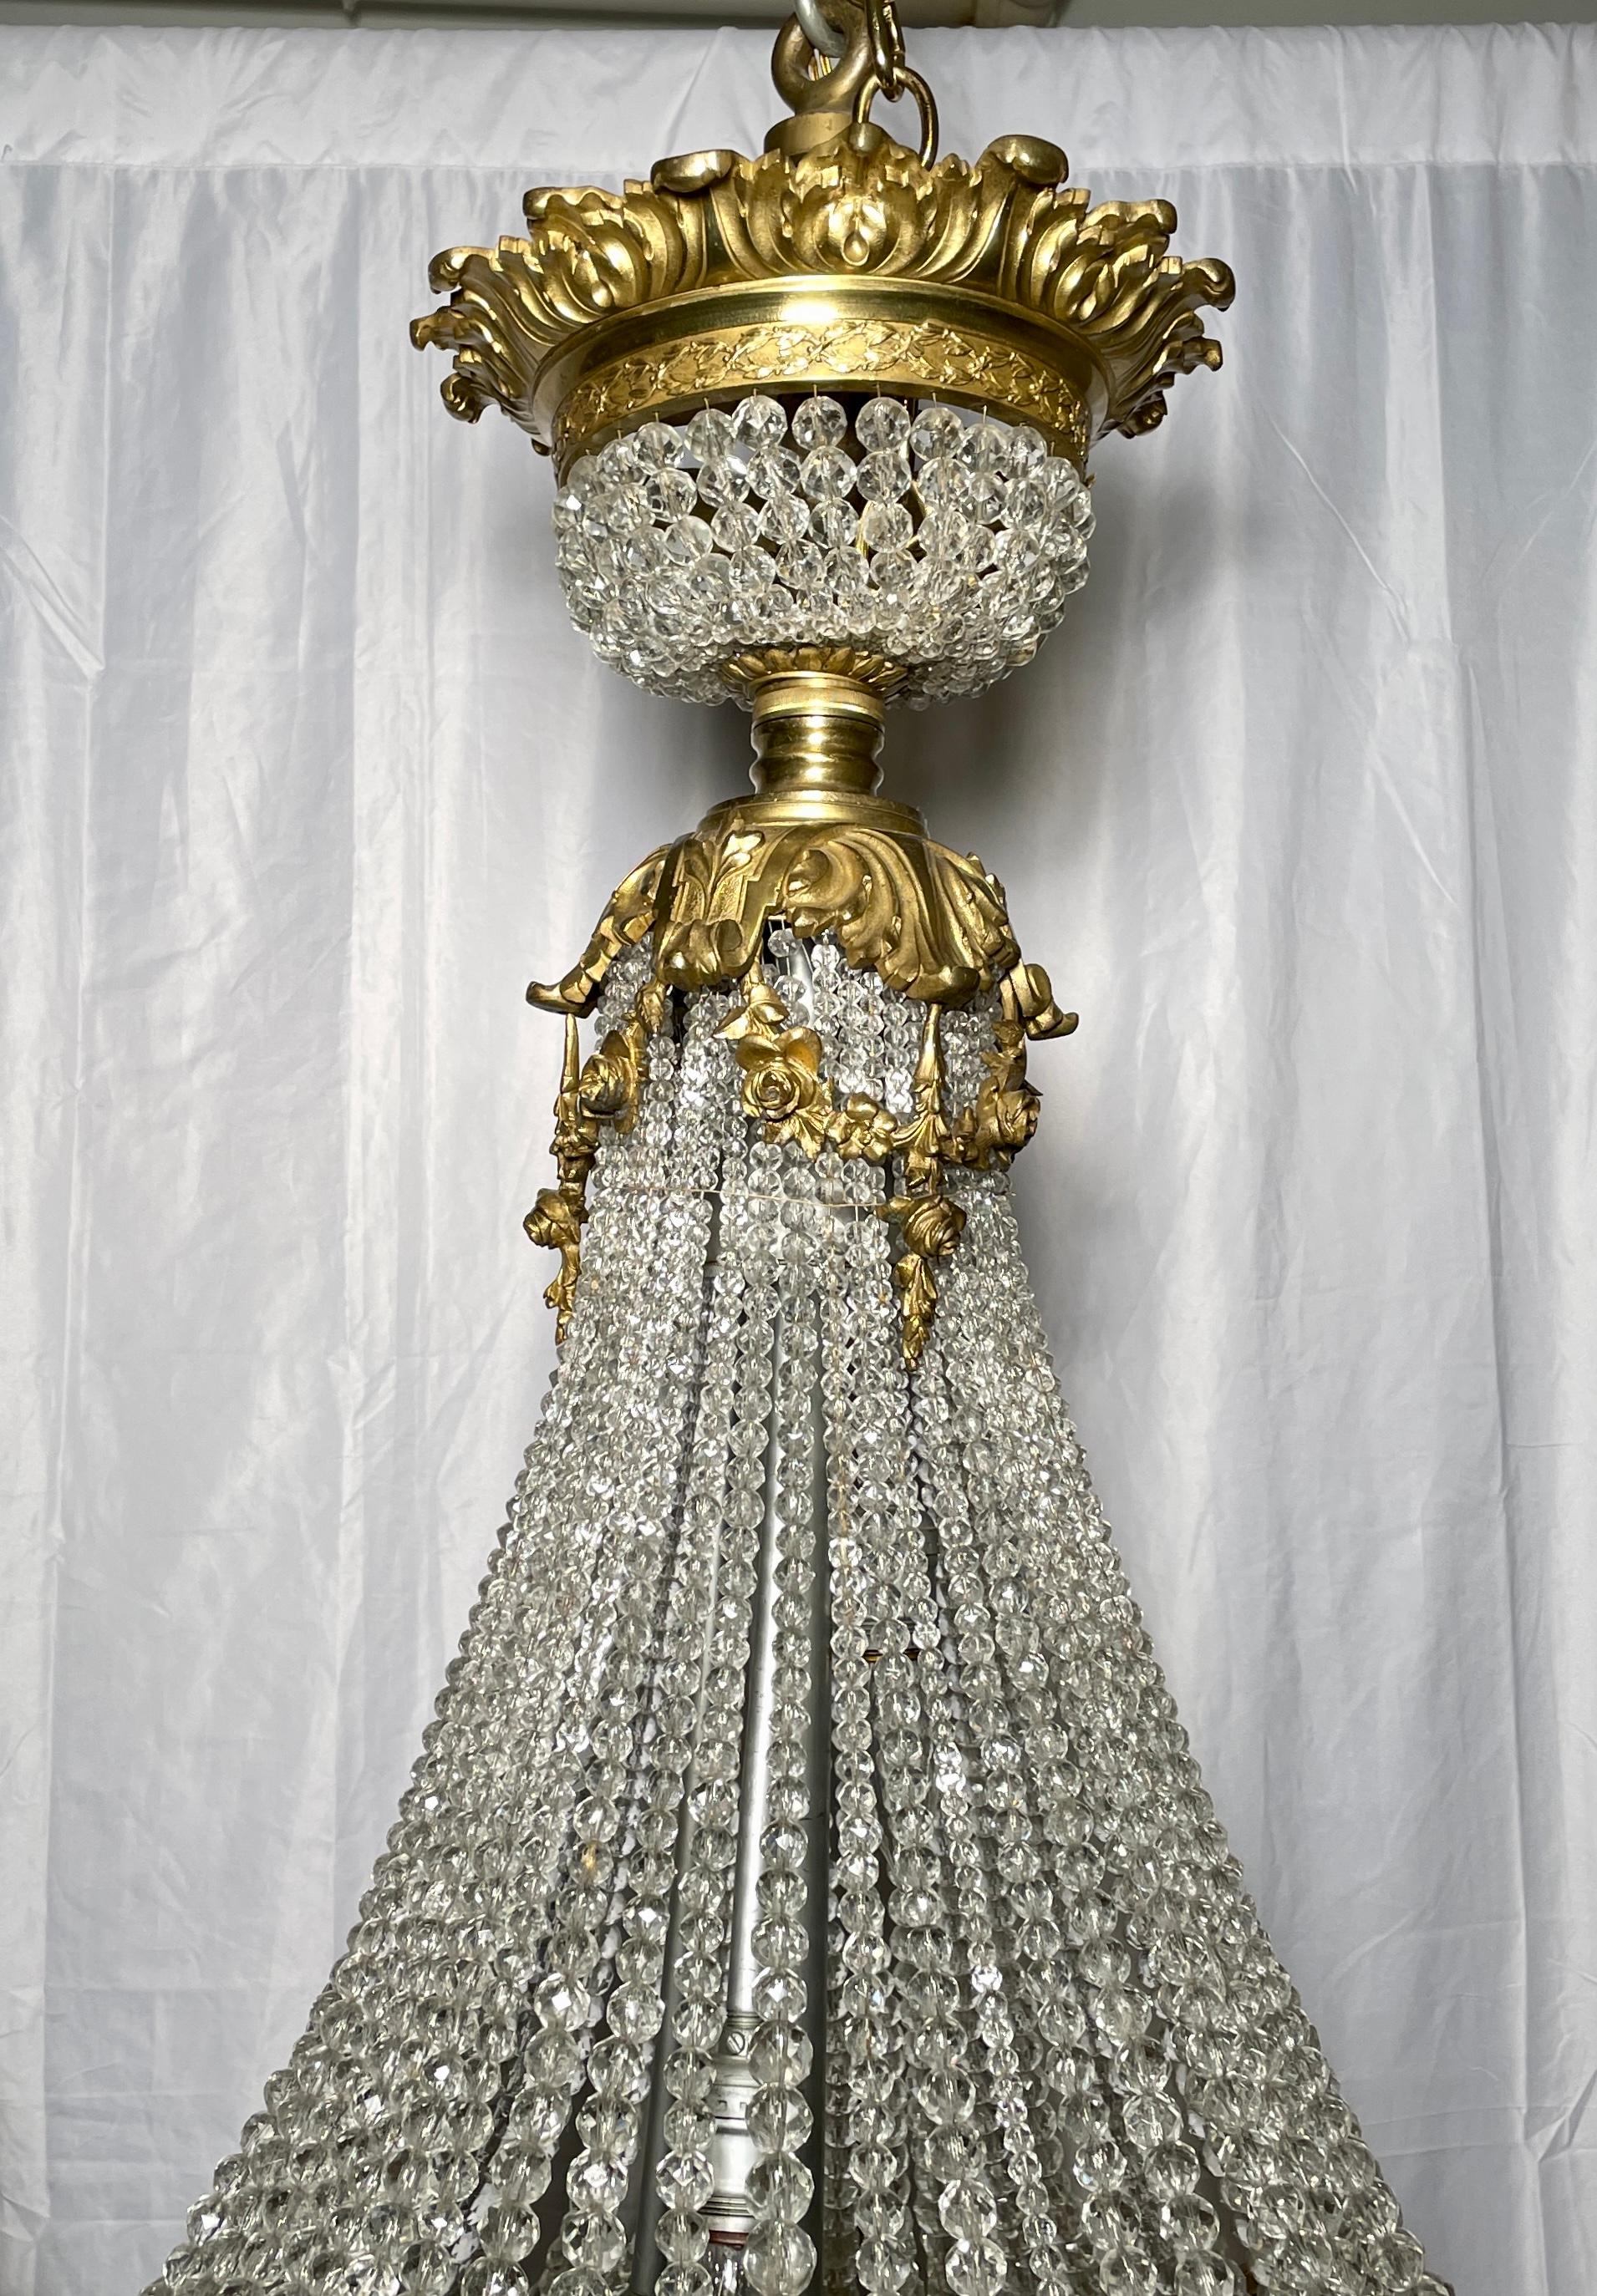 Antique French Louis XVI Gold Bronze and Cut Crystal Chandelier, circa 1890 In Good Condition For Sale In New Orleans, LA